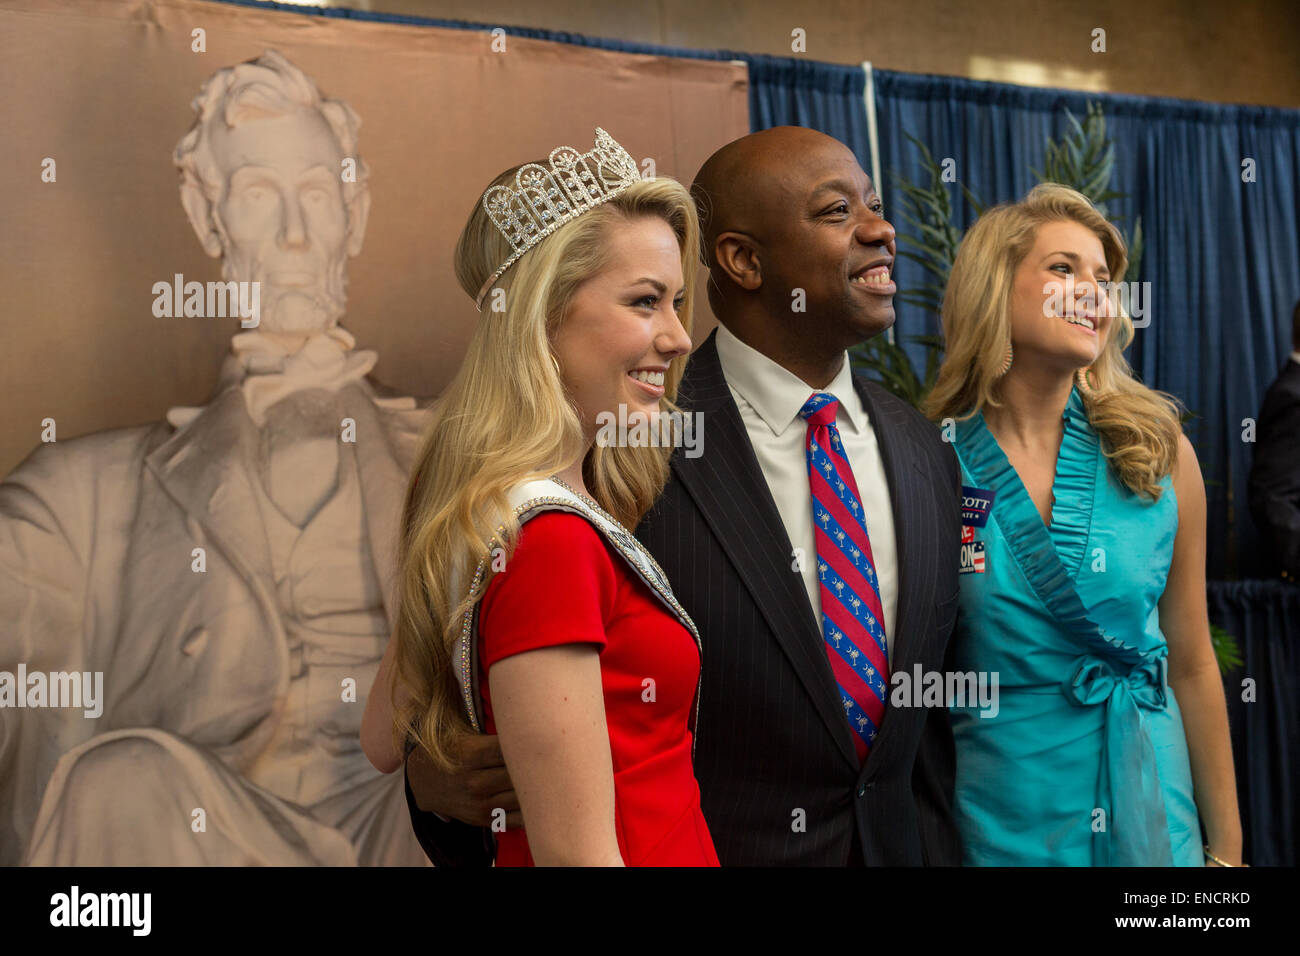 US Senator Tim Scott poses with two beauty Queens at the 48th Annual Silver Elephant Dinner on May 1, 2015 in Columbia, South Carolina. The event honored Republican National Committee Chairman Reince Priebus and was attended by several presidential candidates. Stock Photo